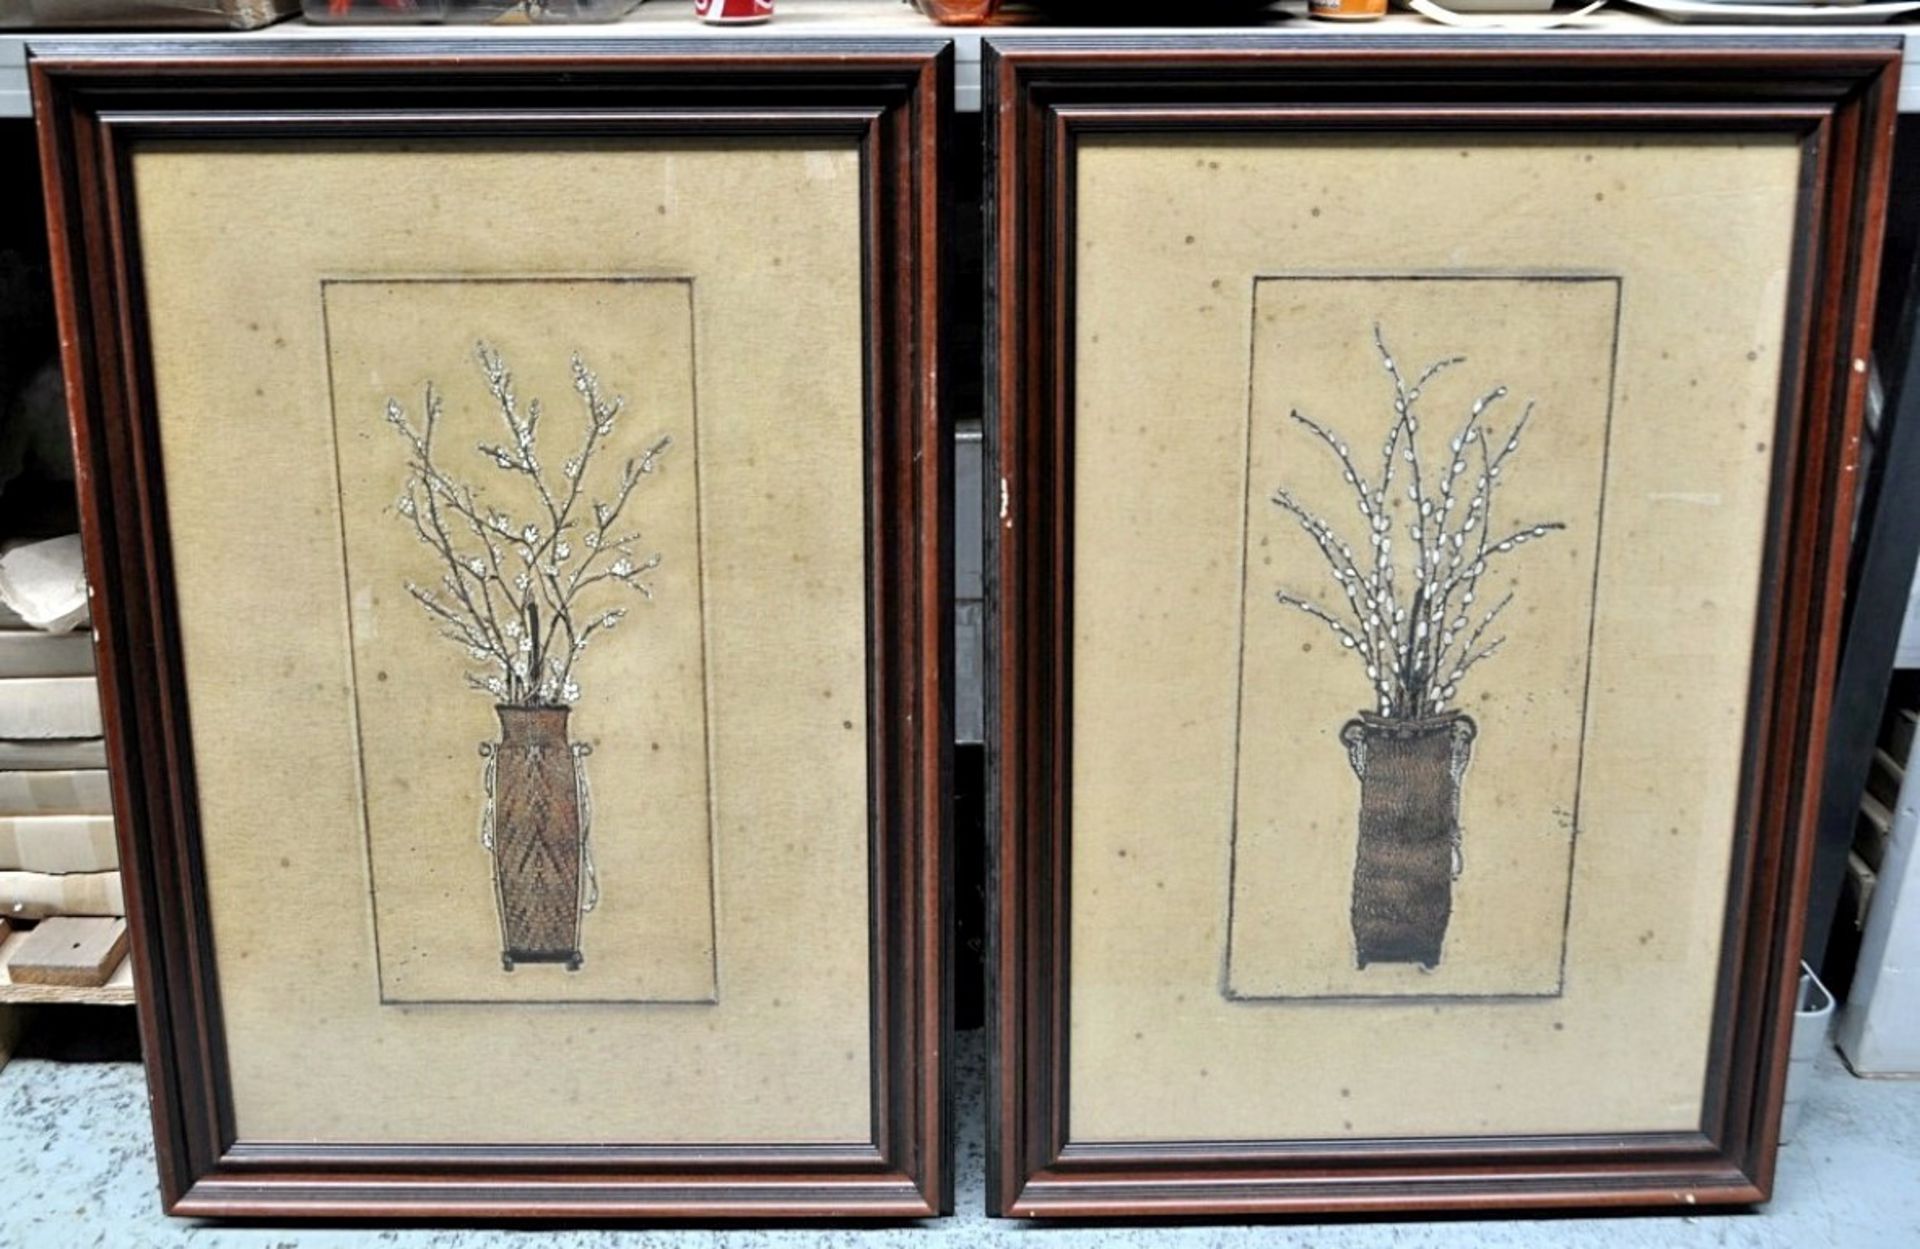 A Pair Of Framed Prints From Eastwood Fine Art - Ref 8410 / 8411 - Good Overall Condition, Mild